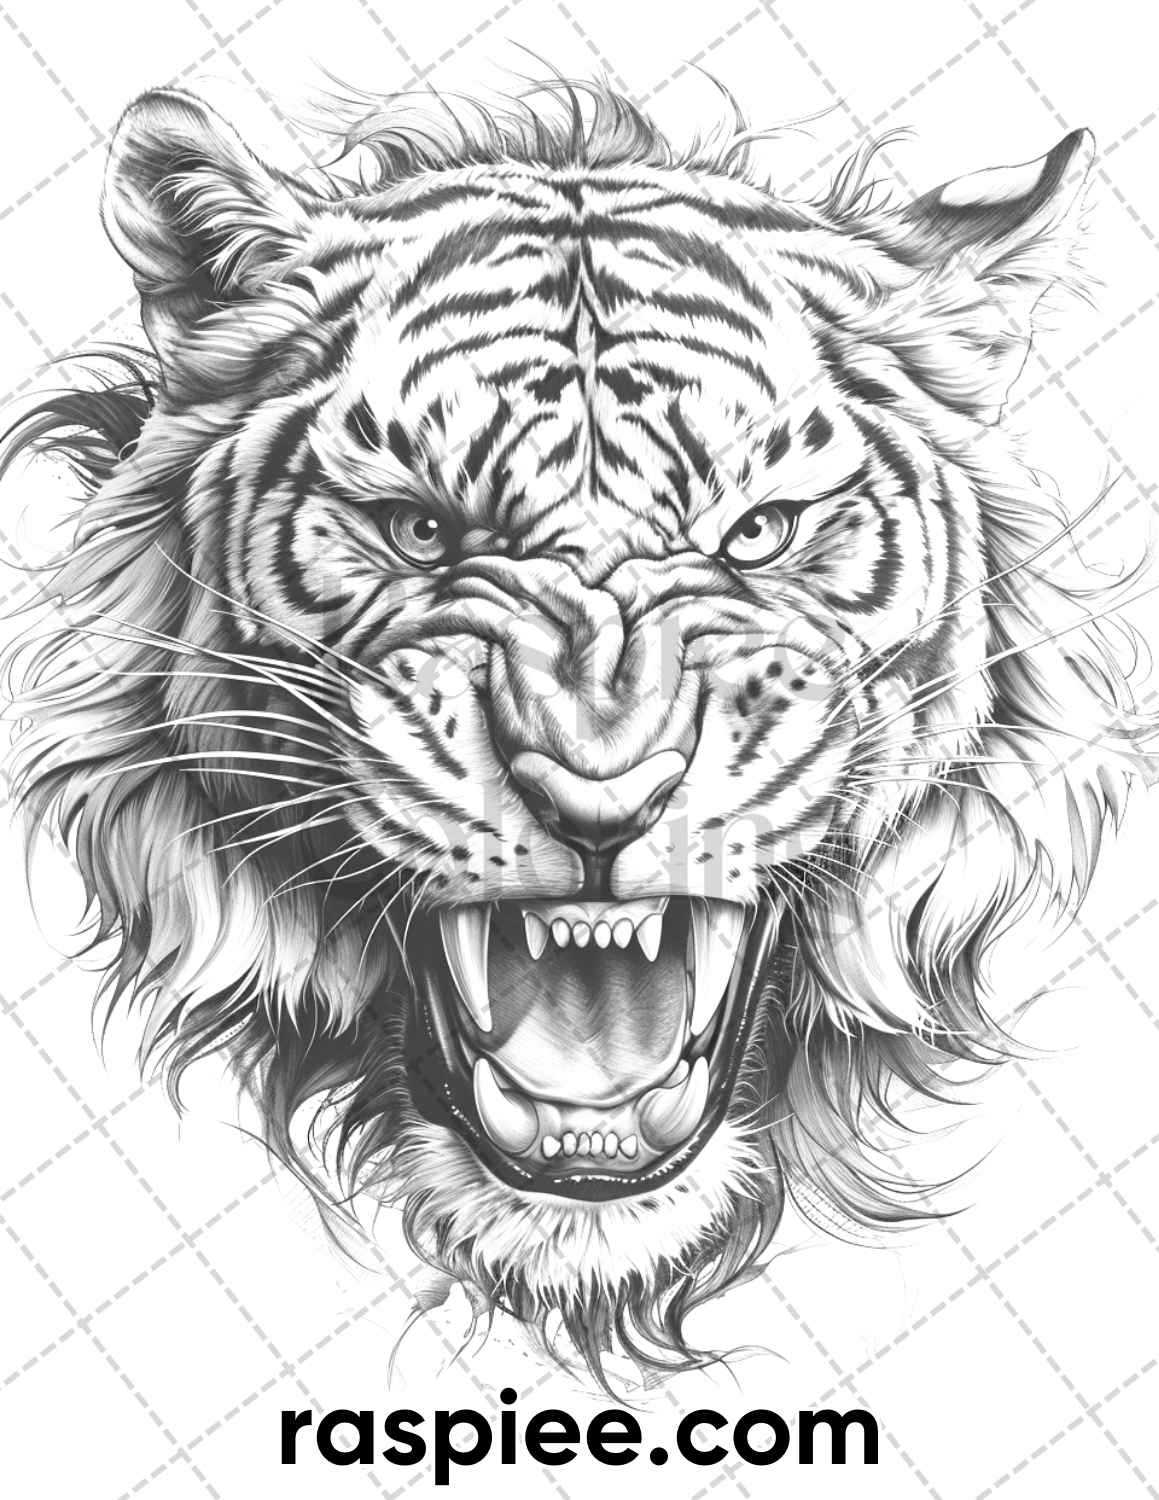 adult coloring pages, adult coloring sheets, adult coloring book pdf, adult coloring book printable, grayscale coloring pages, grayscale coloring books, tattoo coloring pages for adults, tattoo coloring book, grayscale illustration, american traditional tattoo coloring pages